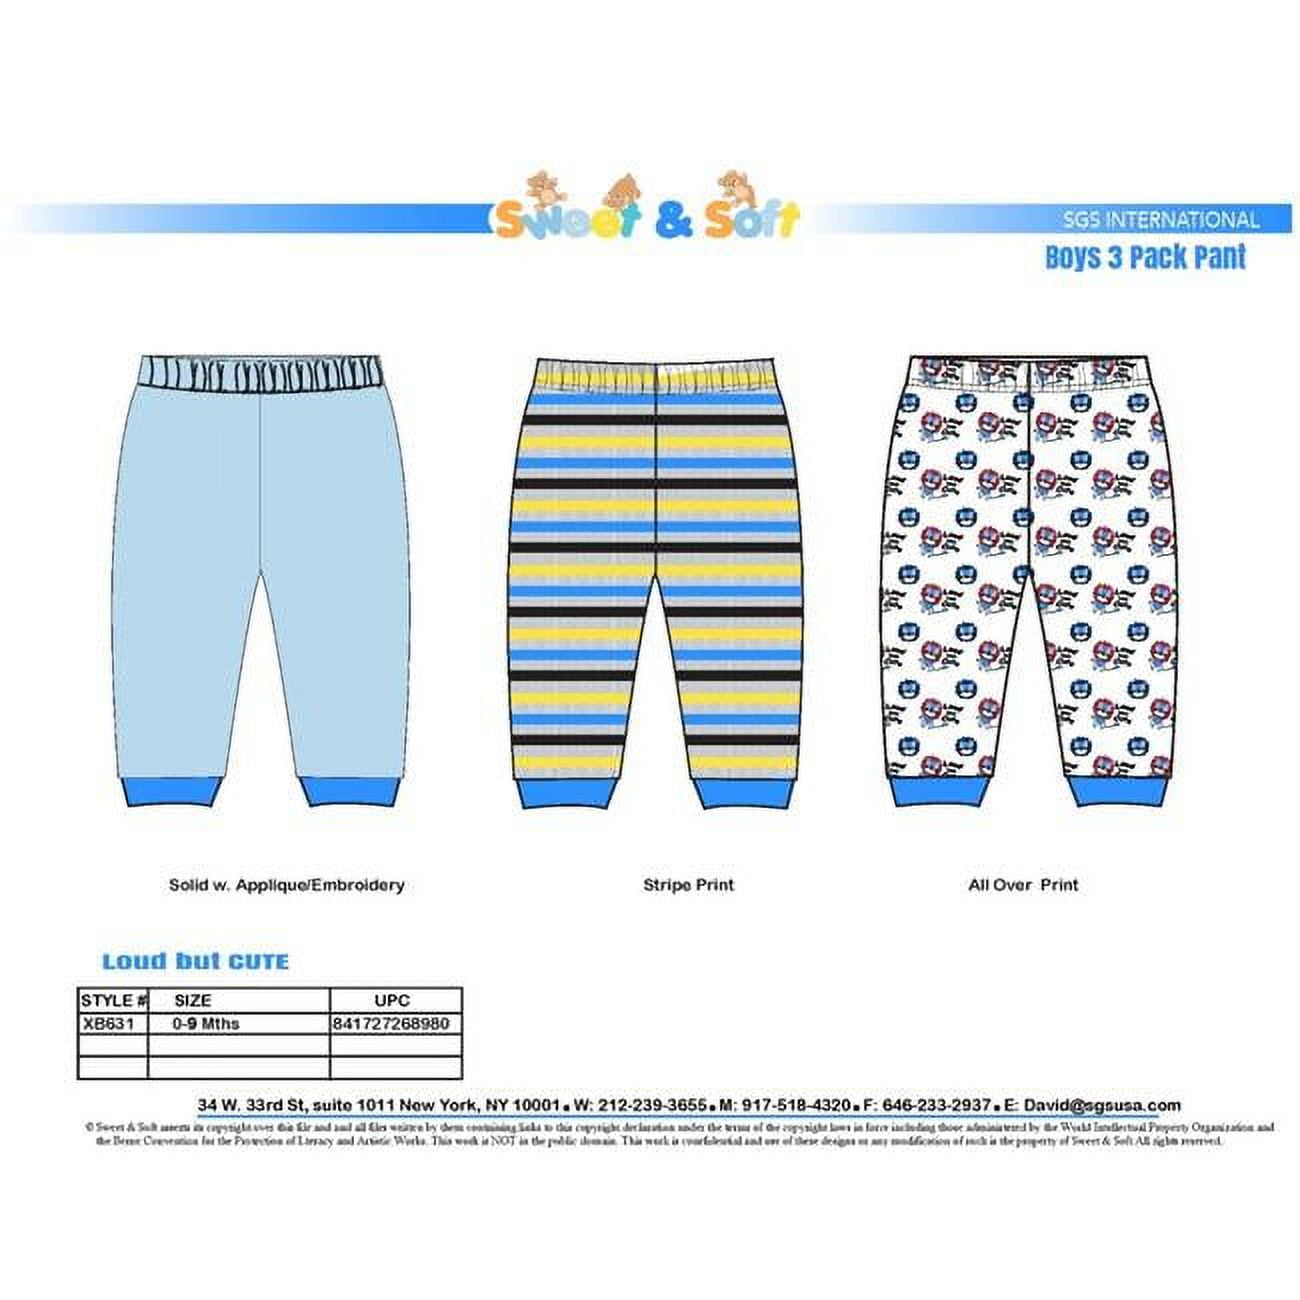 2363802 Baby Boys Pants with Lion Collection, Blue & Grey - Size 0-9M - 3 Per Pack - Case of 24 -  Sweet & Soft